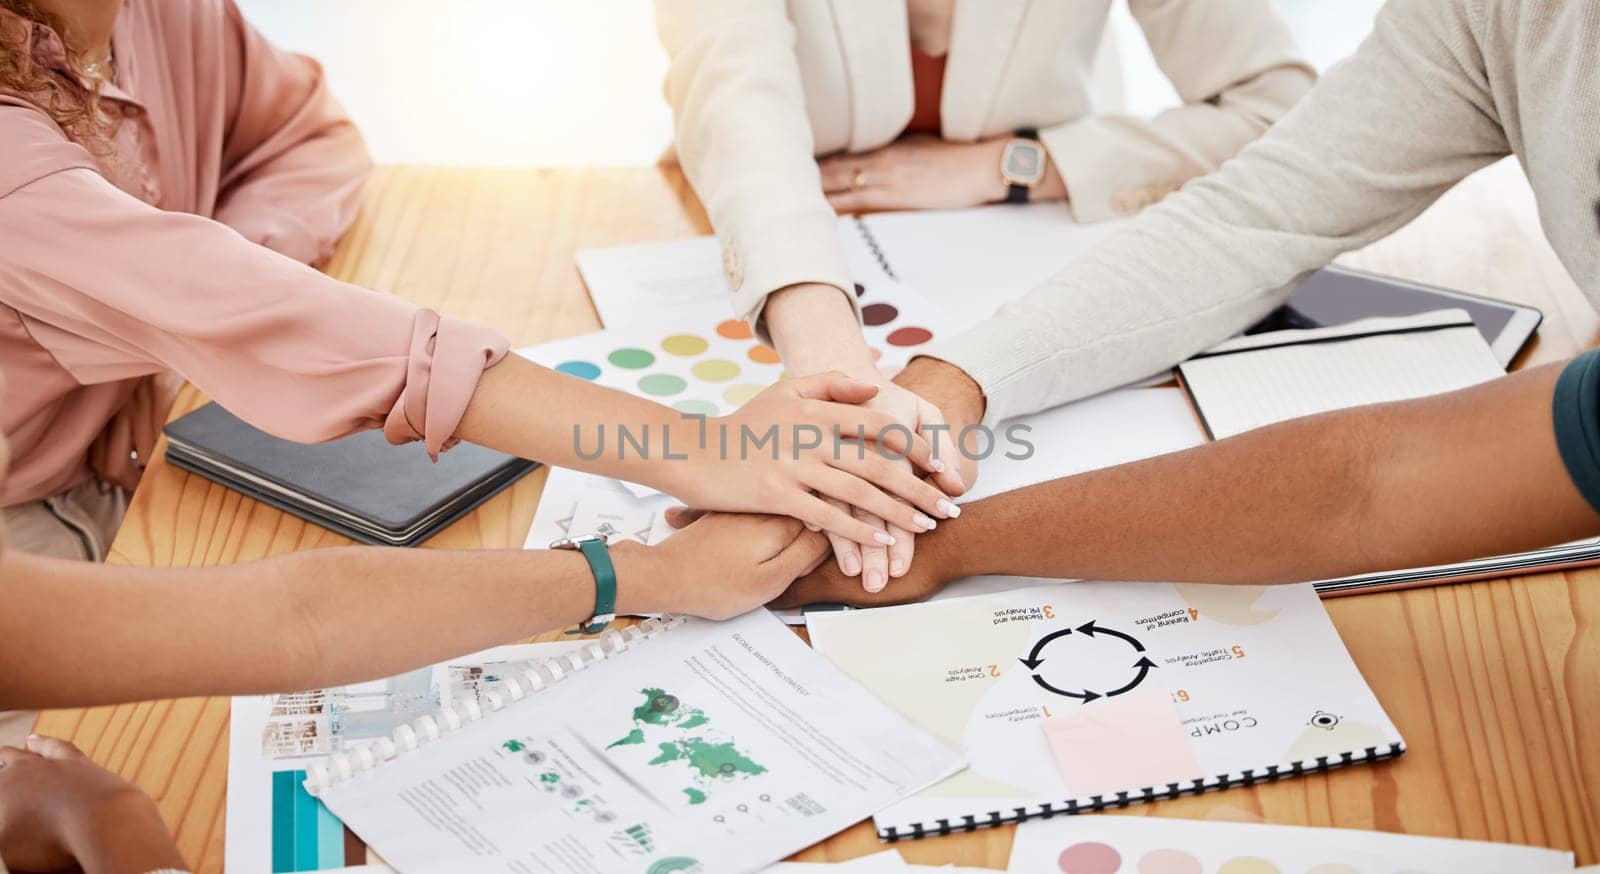 Hands stacked, business and creative people for brand development, project goals and teamwork on documents. Together sign, meeting and graphic designer, marketing agency or person in collaboration by YuriArcurs